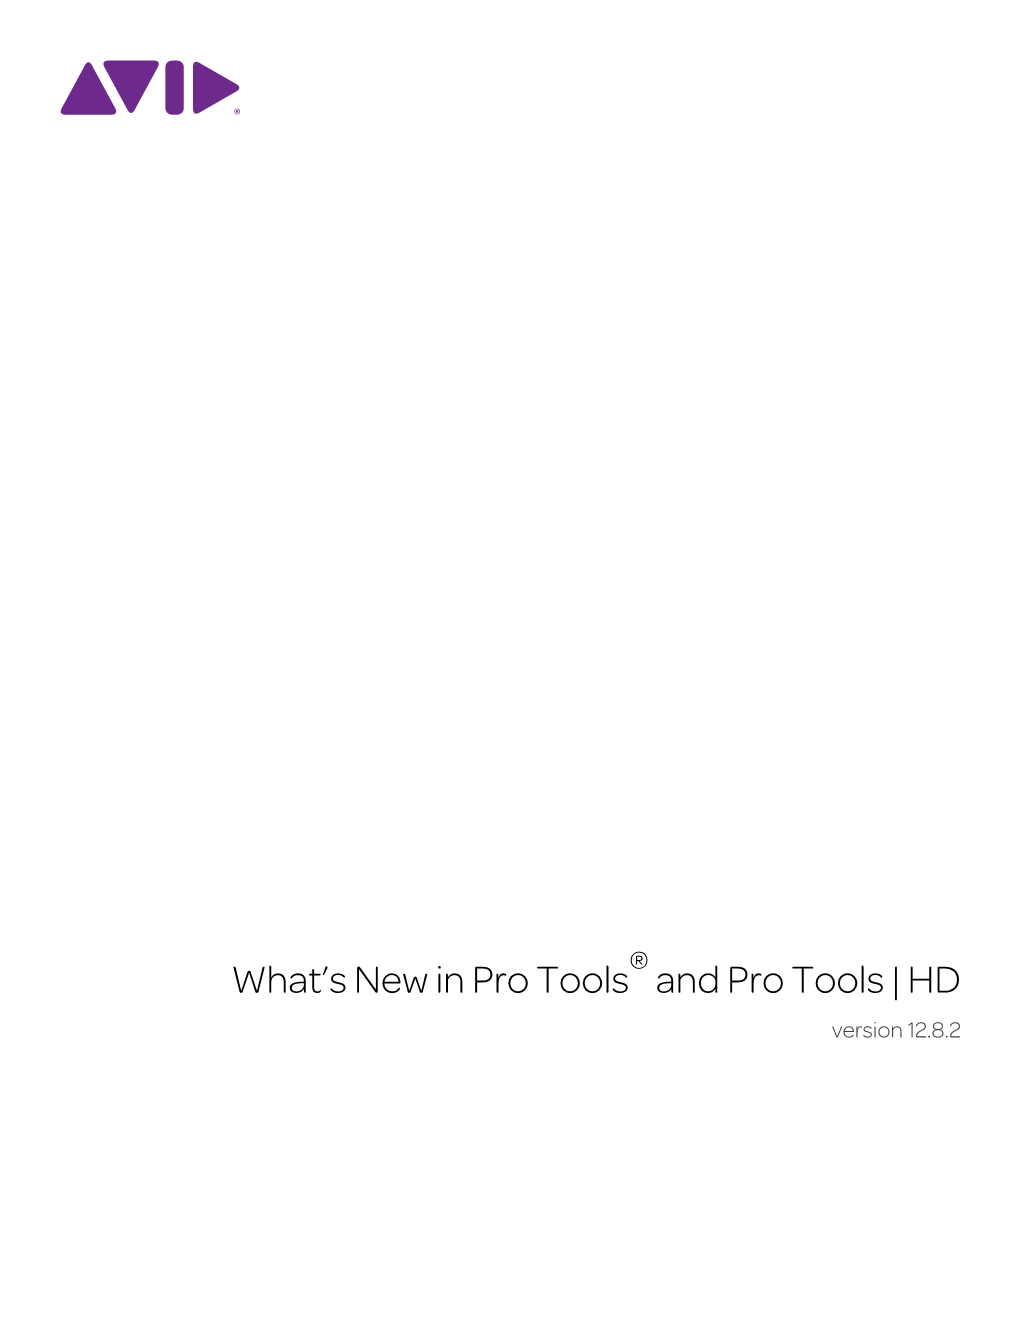 What's New in Pro Tools 12.8.2